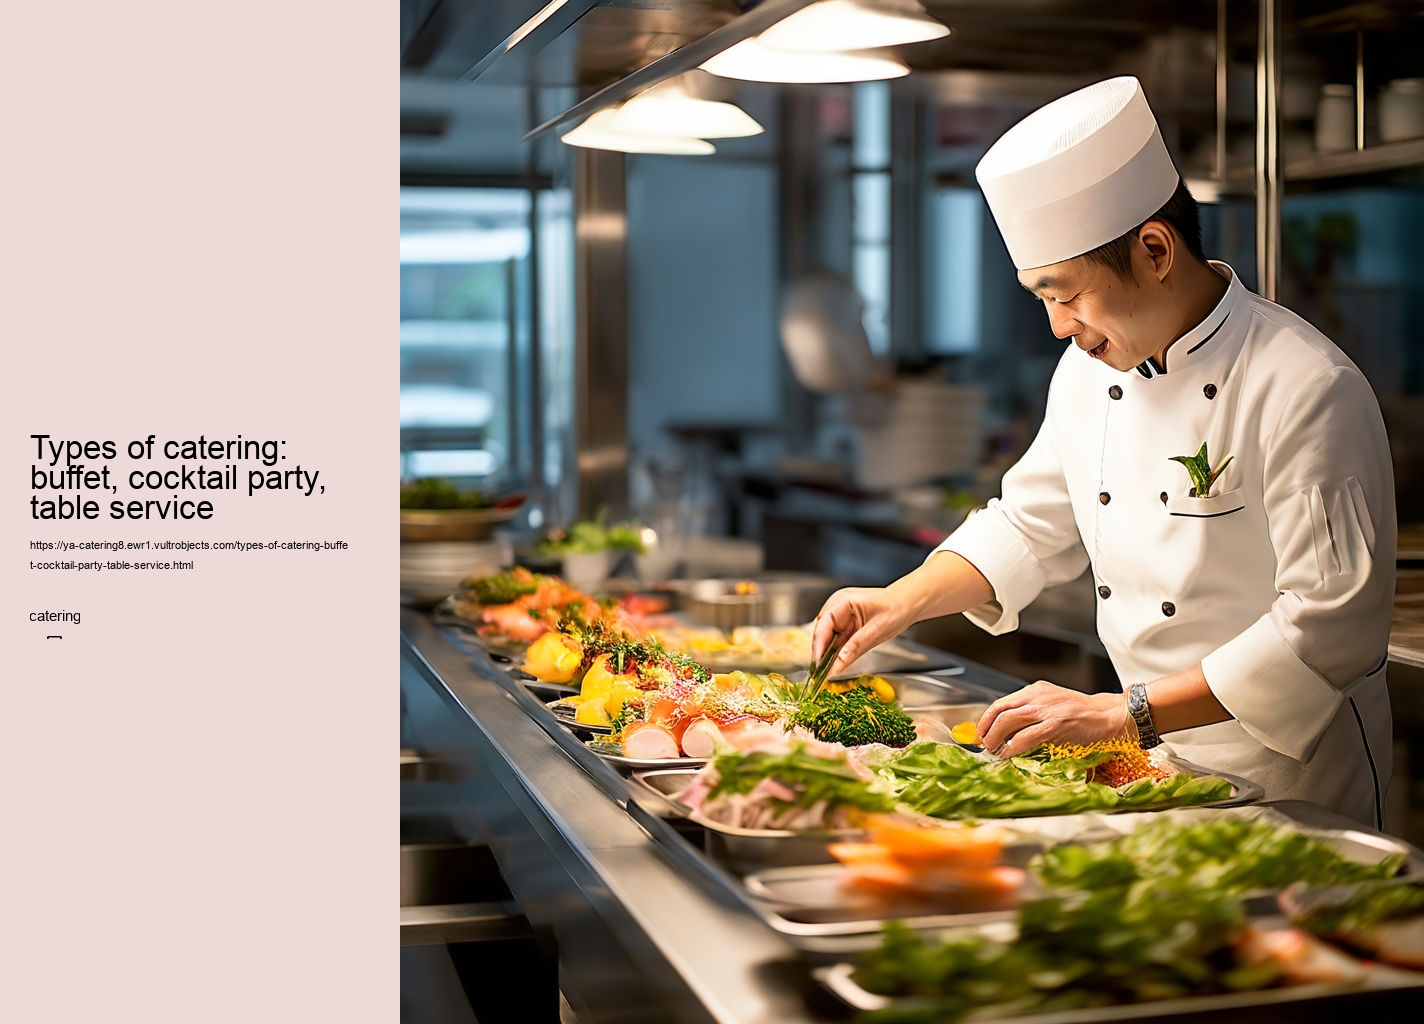 Types of catering: buffet, cocktail party, table service